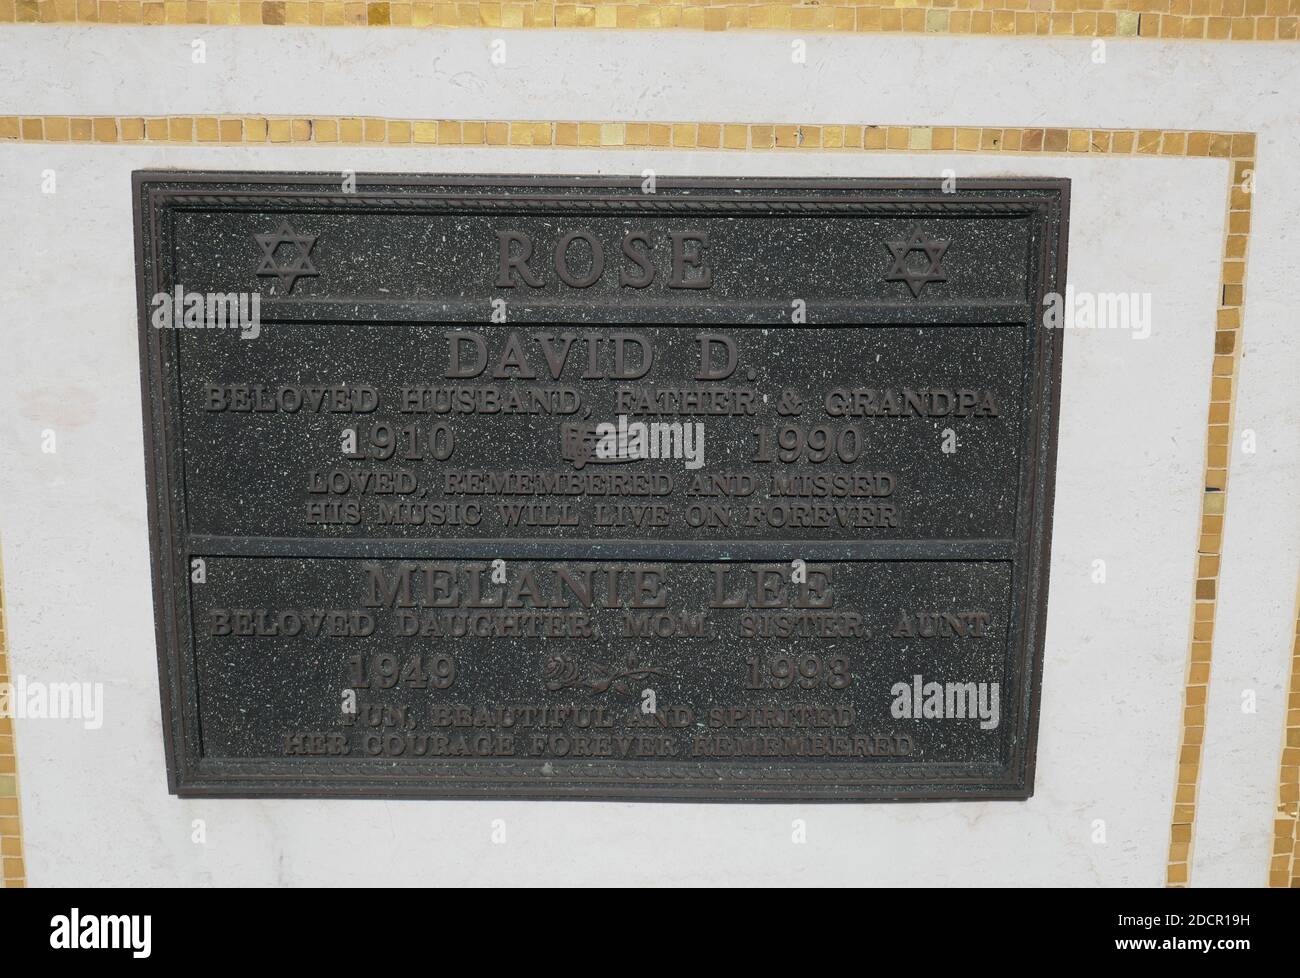 Los Angeles, California, USA 17th November 2020 A general view of atmosphere of composer/songwriter David Rose's Grave at Mount Sinai Cemetery Hollywood Hills on November 17, 2020 in Los Angeles, California, USA. Photo by Barry King/Alamy Stock Photo Stock Photo